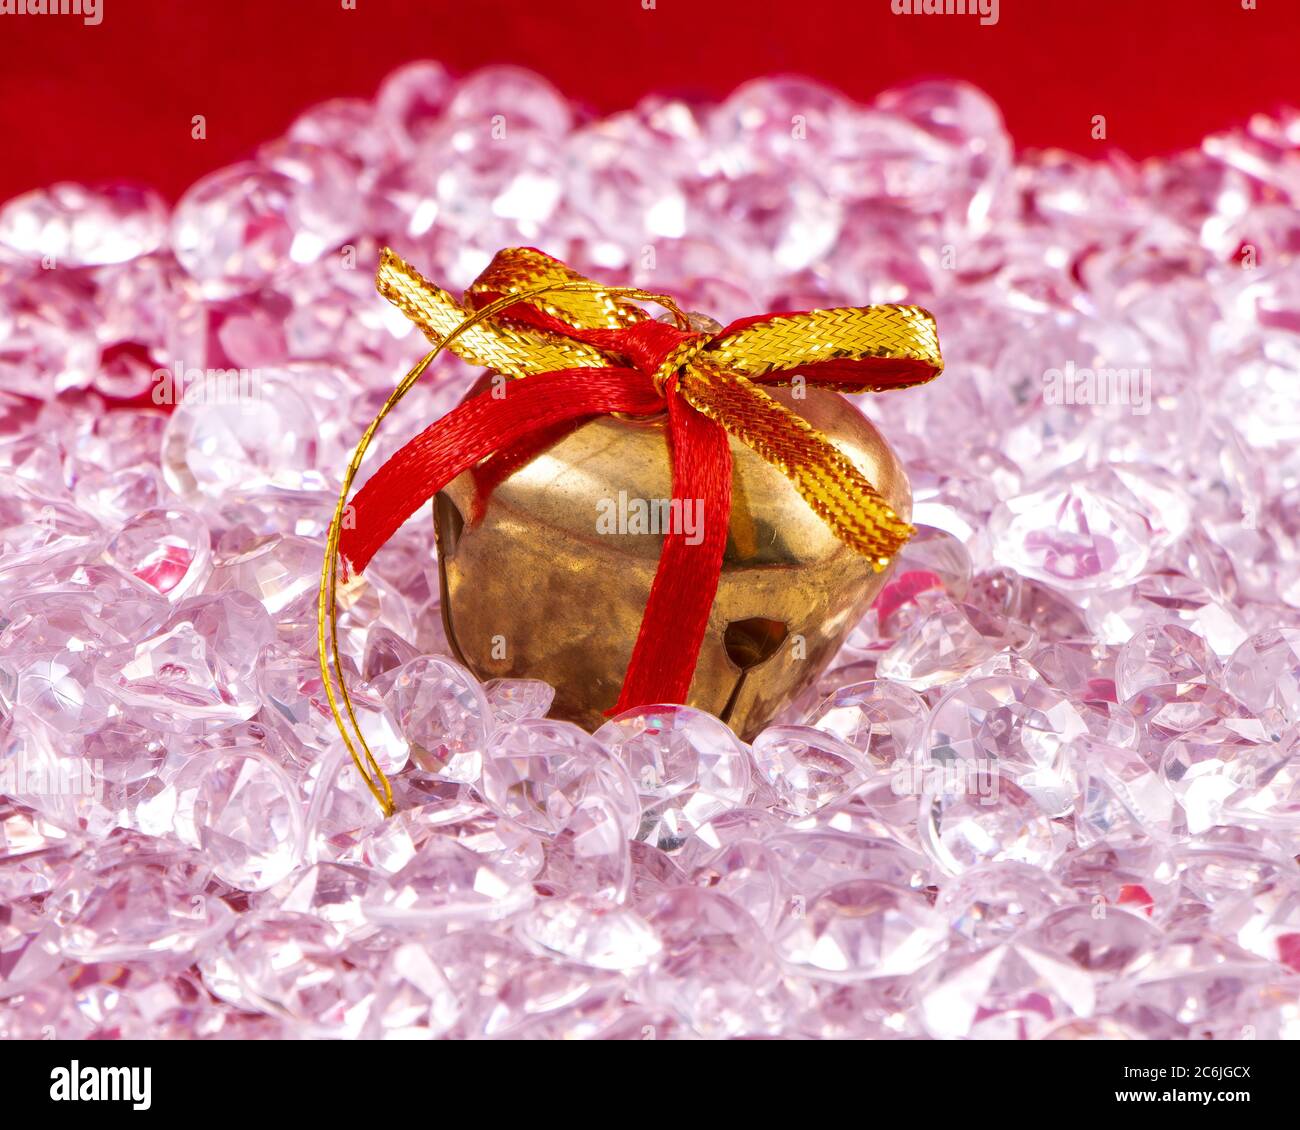 Closeup of Christmas bell with red and gold ribbons on bed of crystals Stock Photo